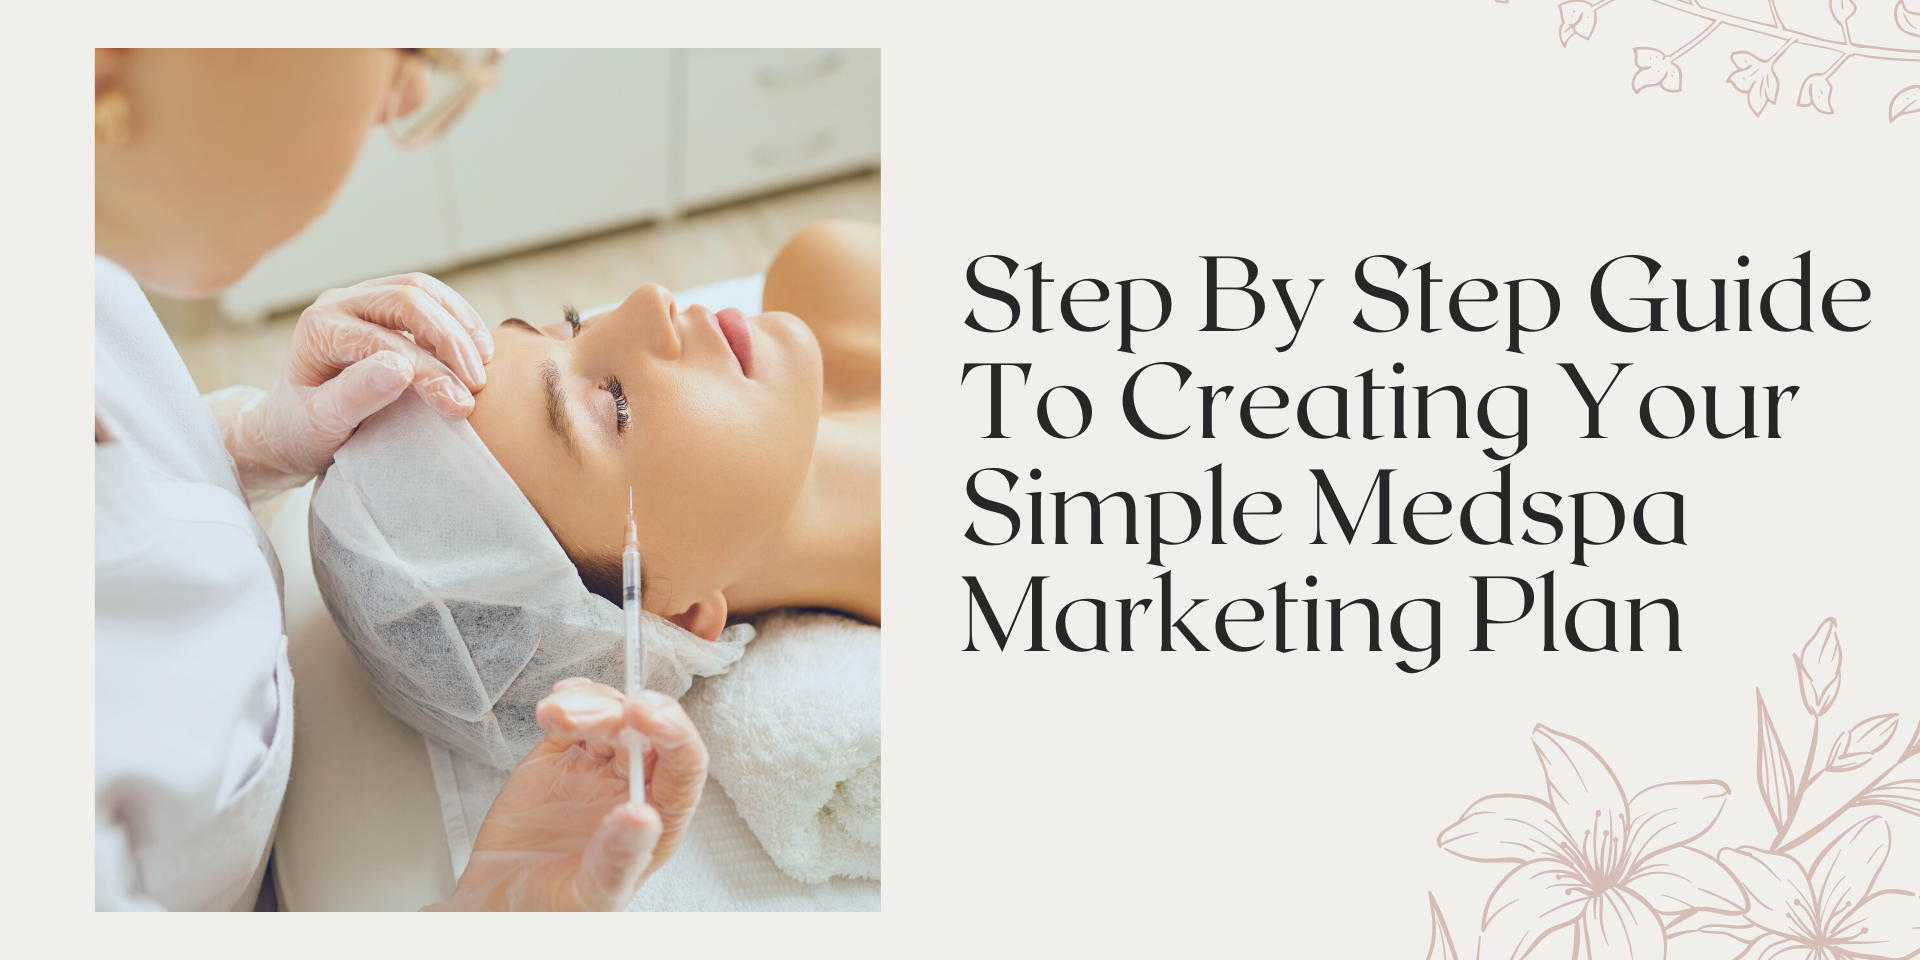 Medspa Marketing Plan Step By Step Guide To Creating Your Own Plan